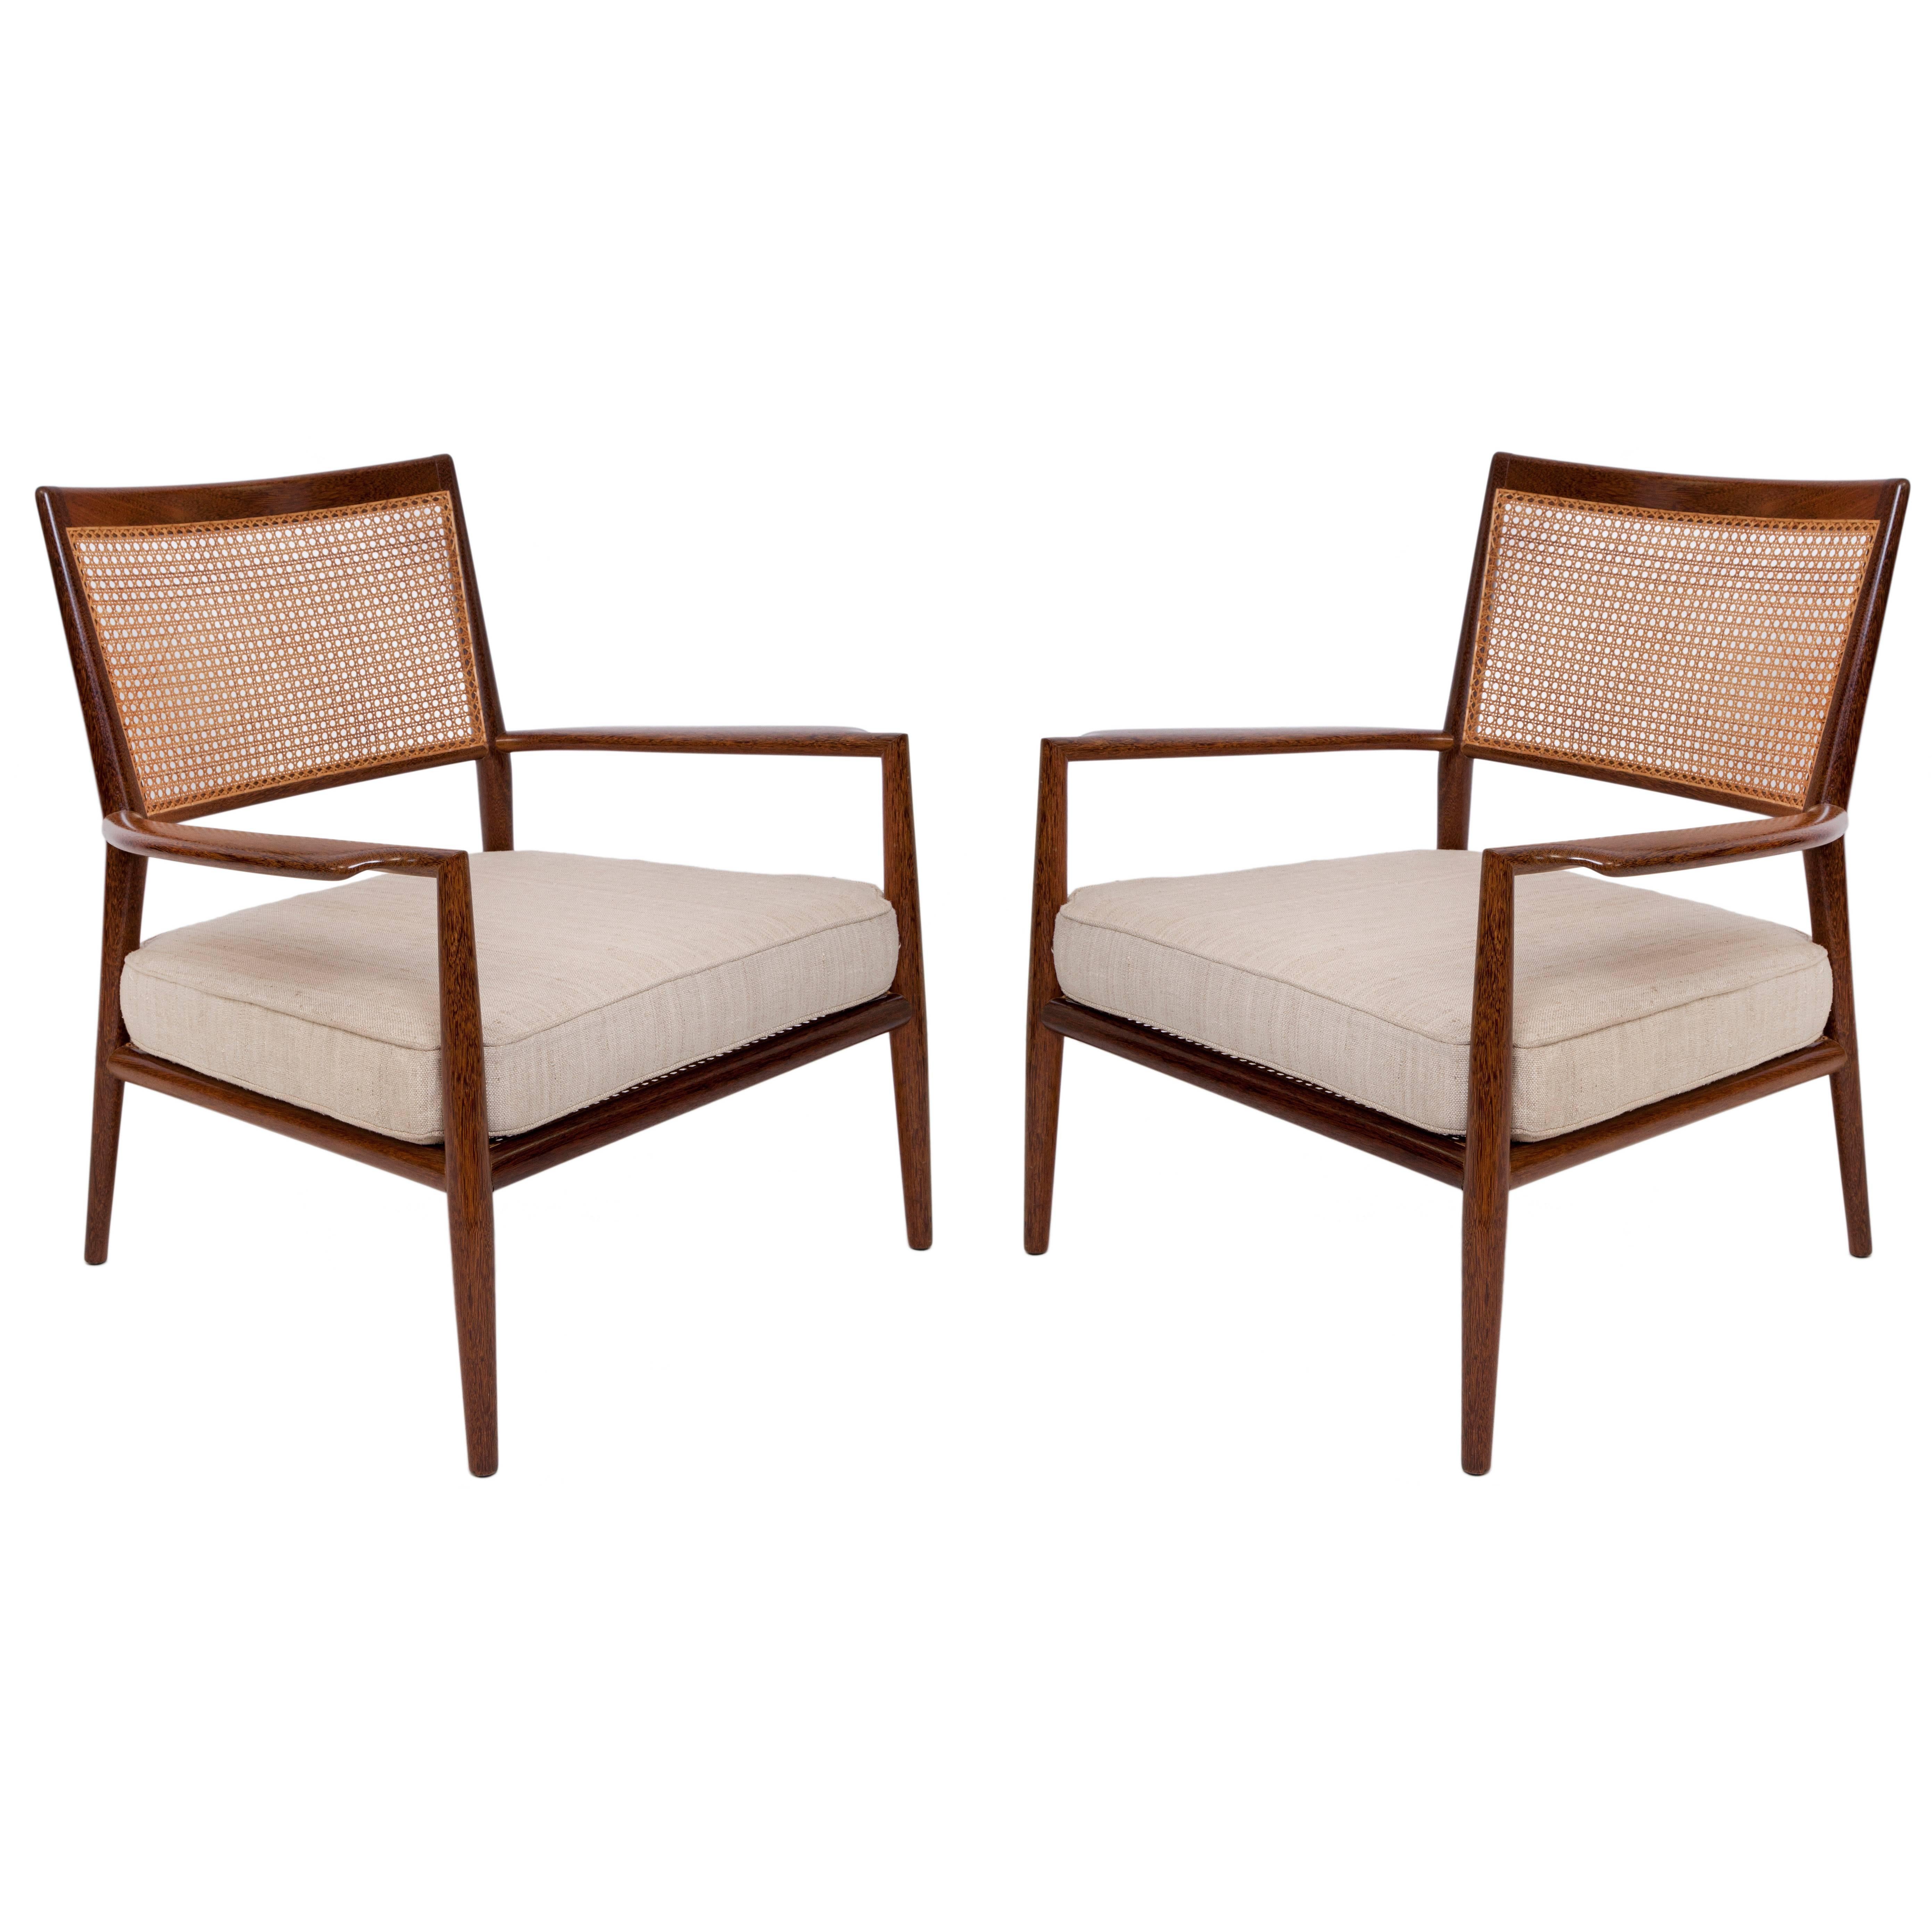 Pair of Carlos Milan Cane Seat & Back Armchairs in Sucupira with Beige Cushions